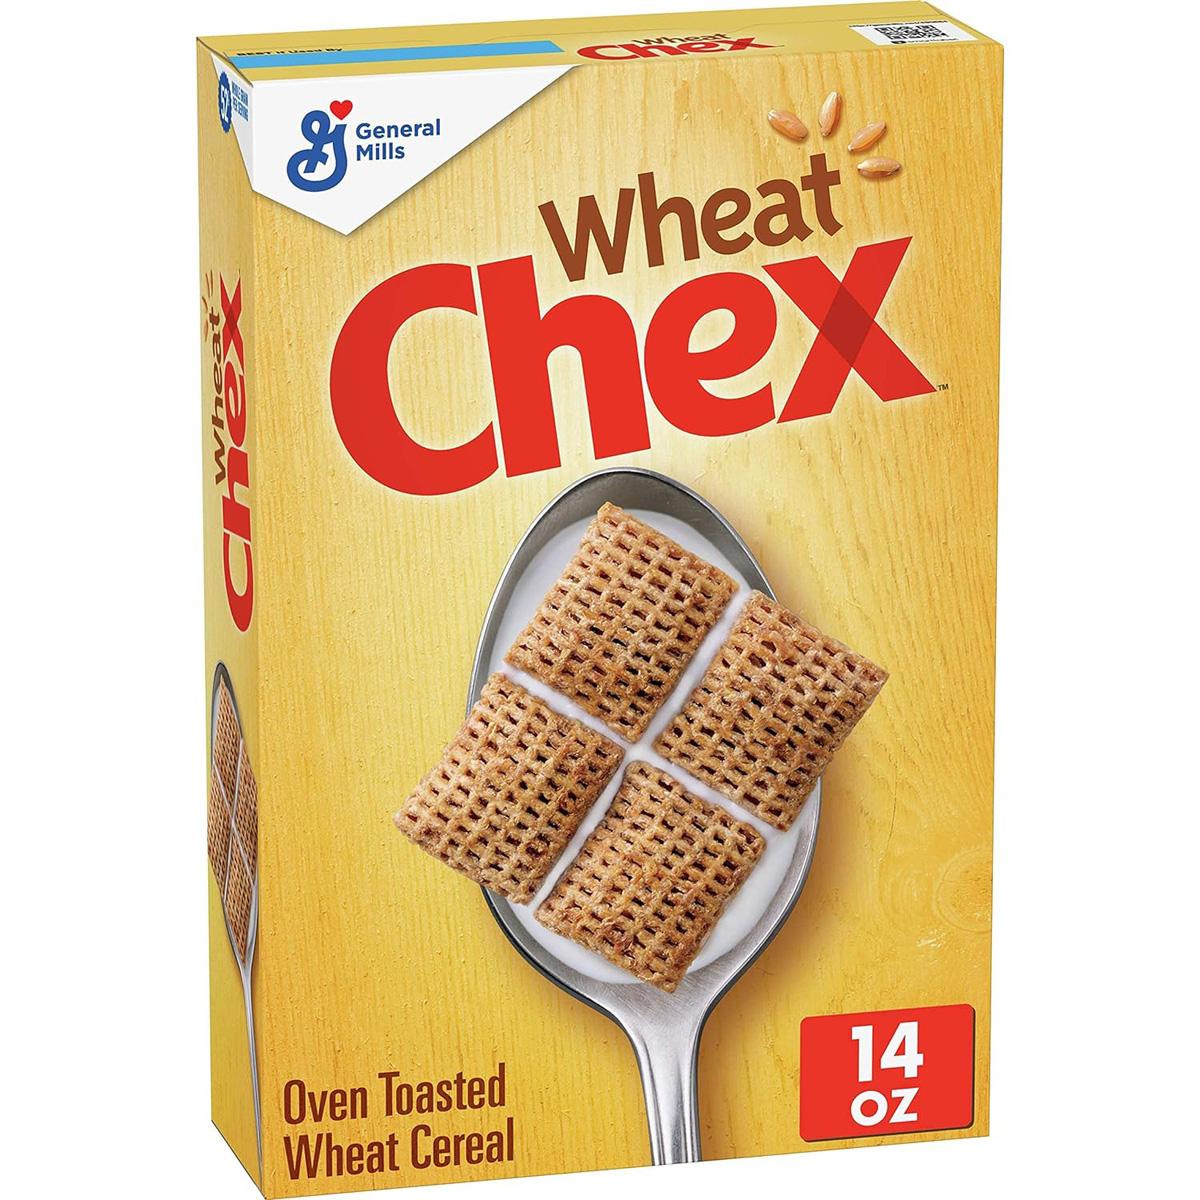 Chex Wheat Breakfast Cereal for $2.49 Shipped